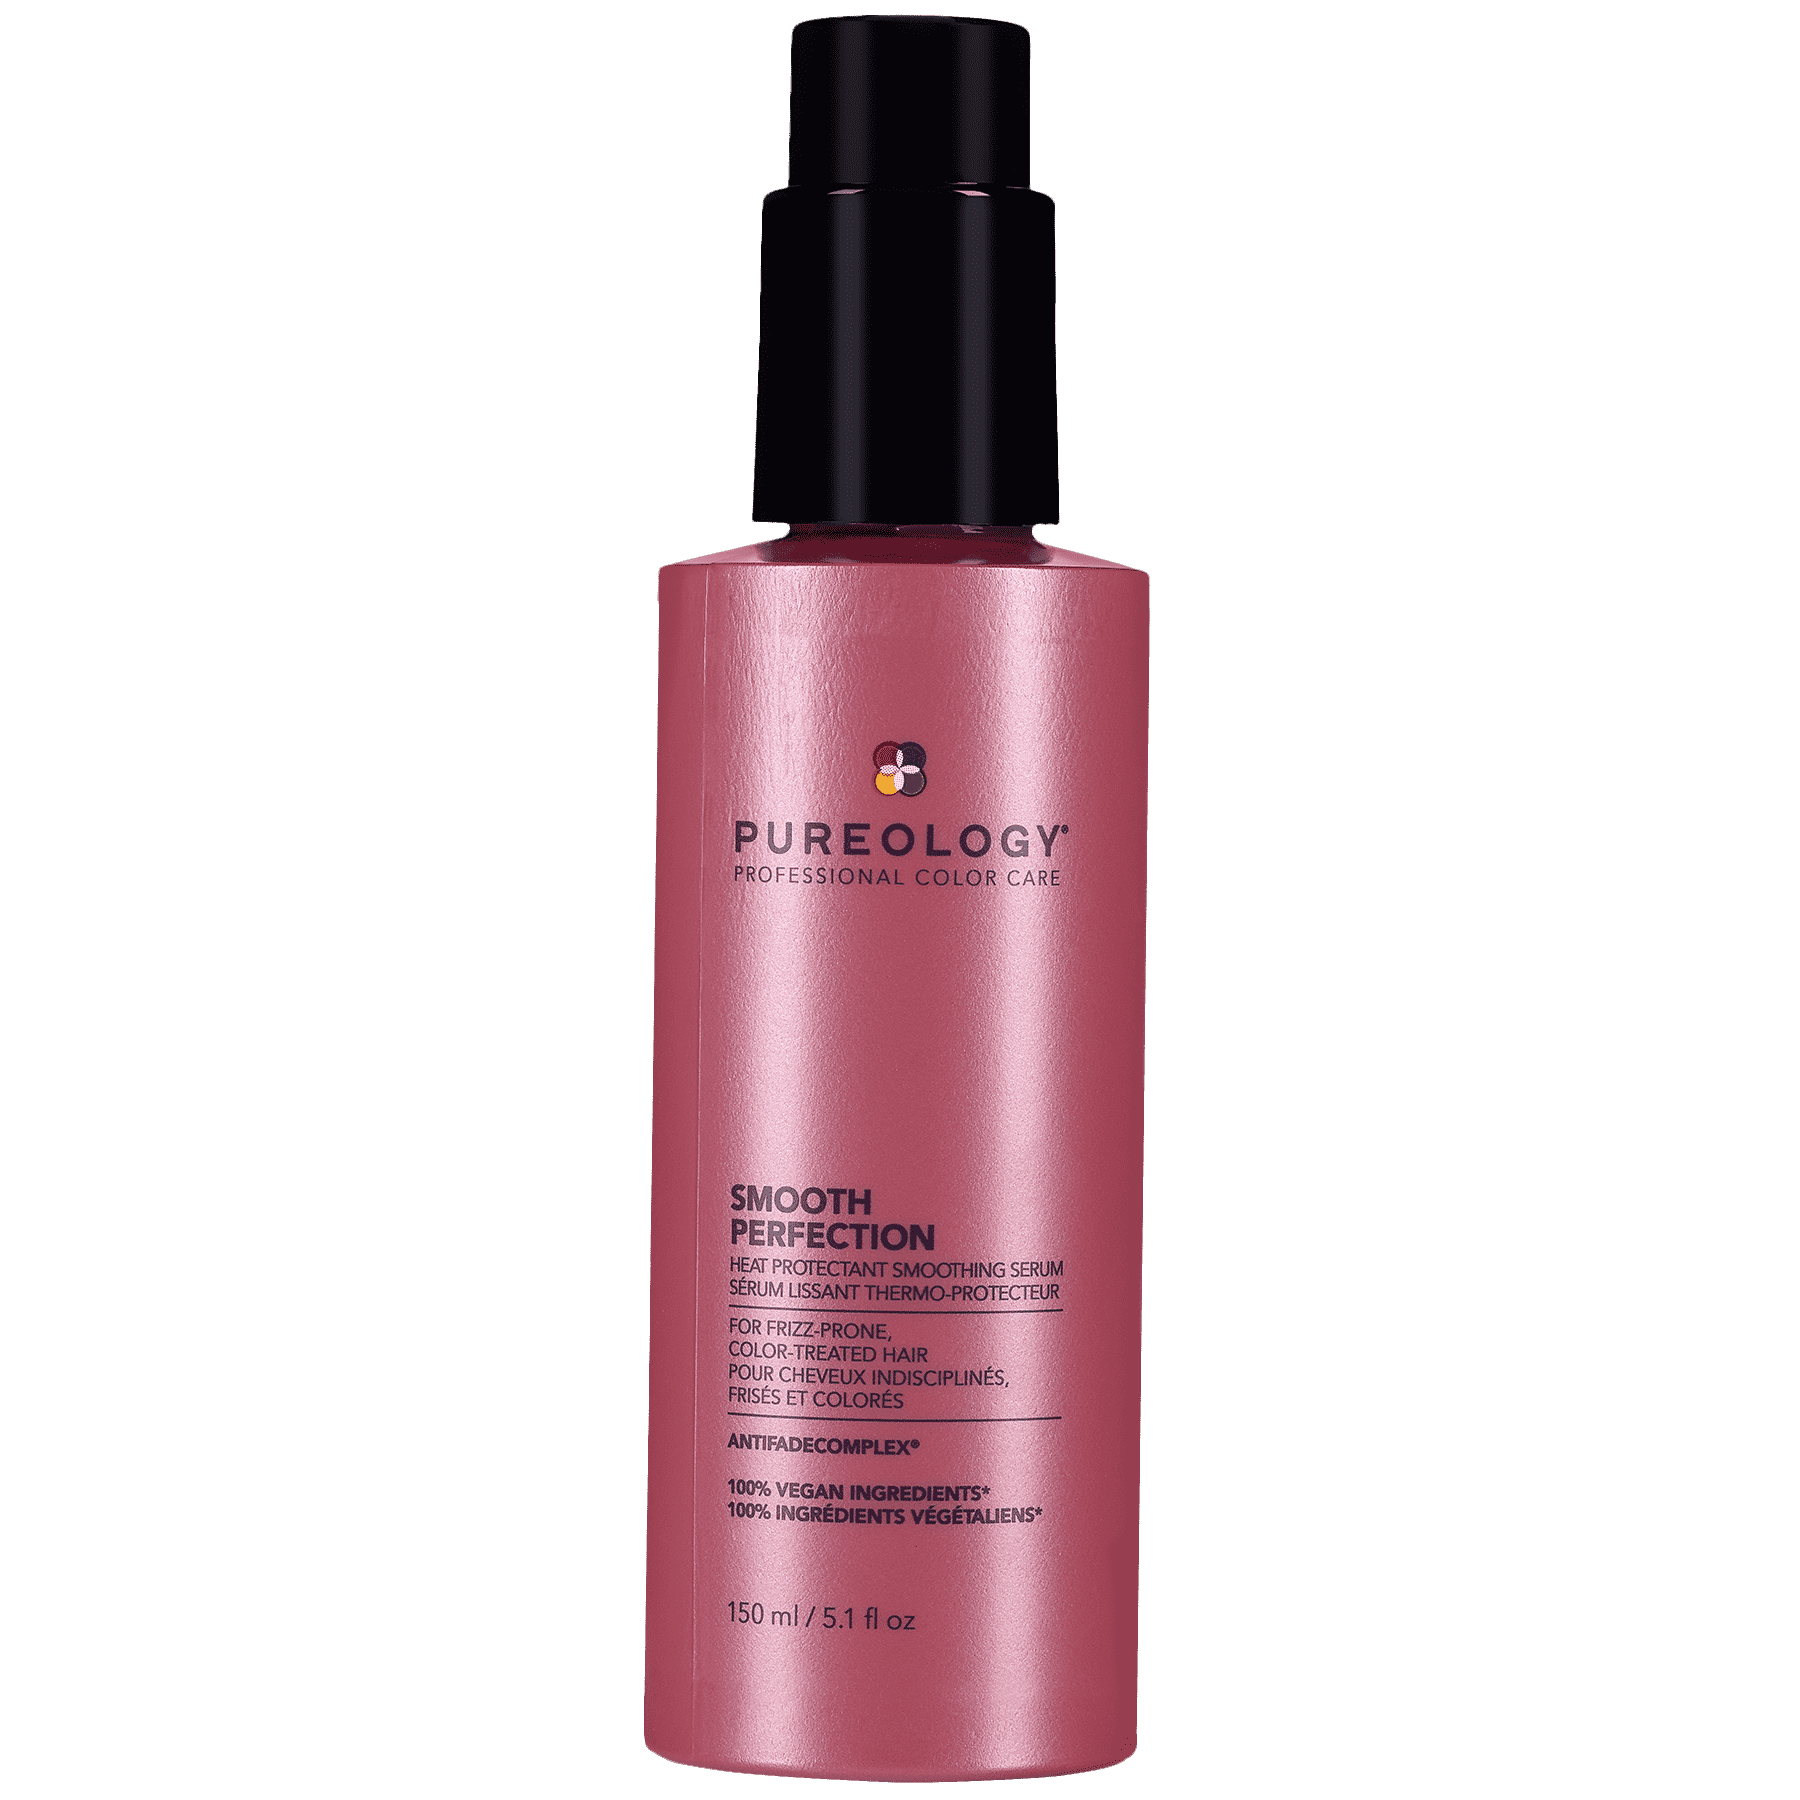 https://expressionspella.com/wp-content/uploads/2020/06/pureology-smooth-perfection-smoothing-serum.png